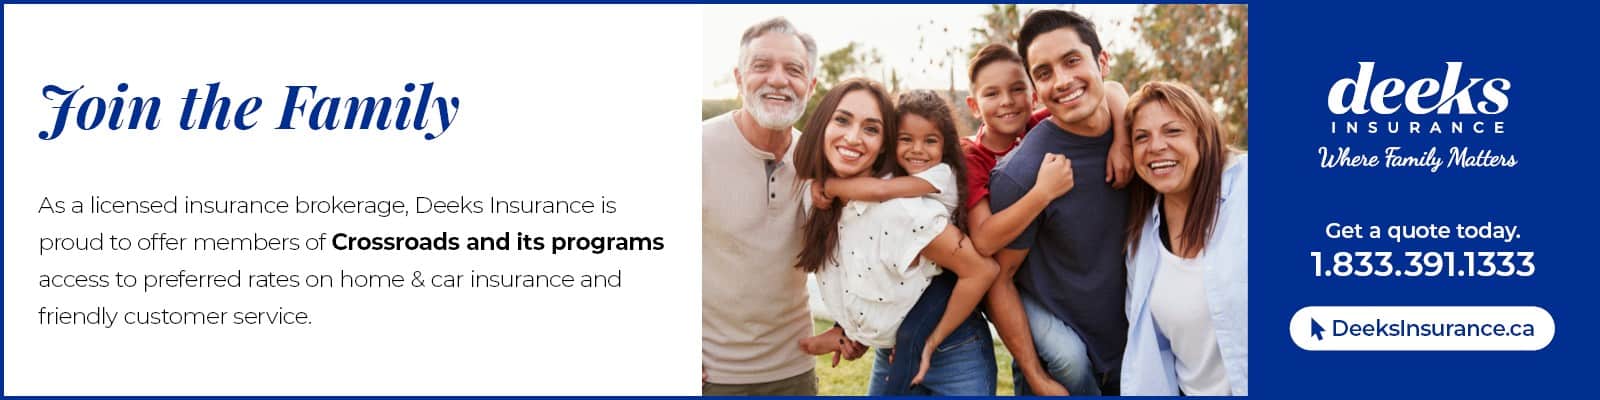 Deeks Insurance - As a licensed insurance brokerage, Deeks Insurance IS proud to offer members of Crossroads and its programs access to preferred rates on home & car insurance and friendly customer service.